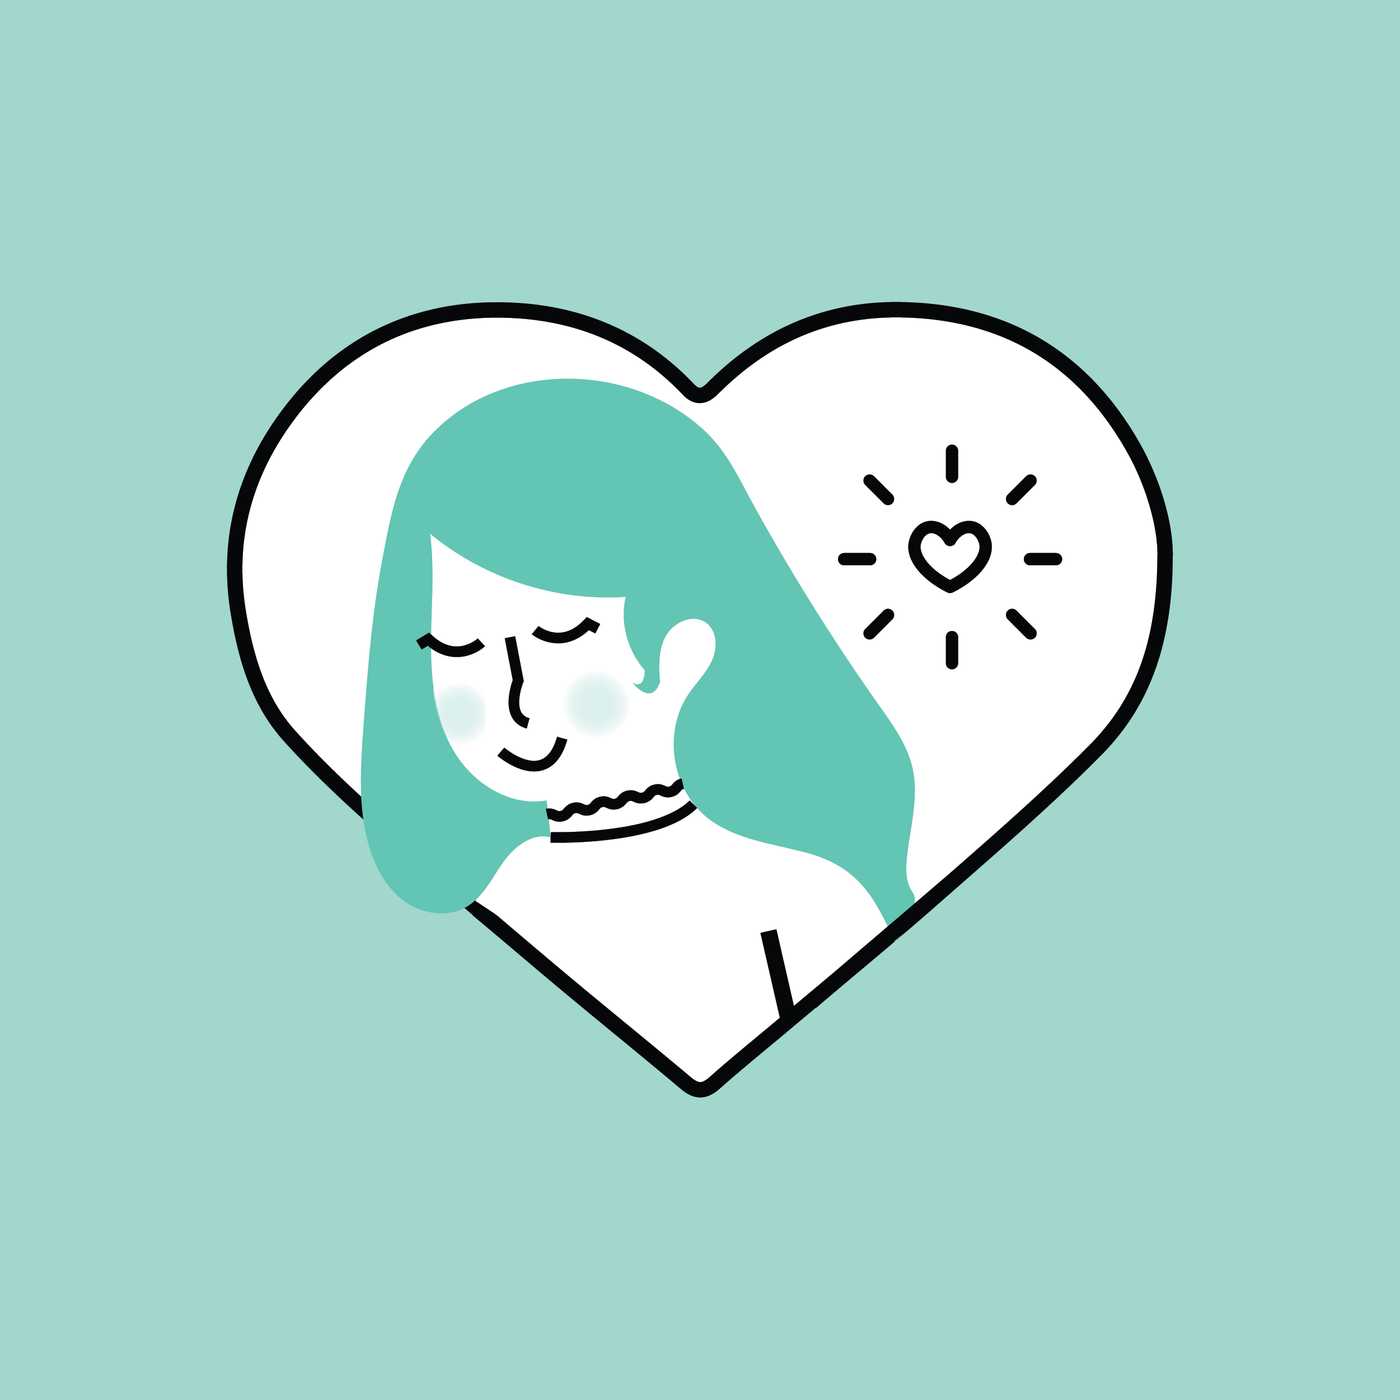 teal background with a heart in the center that has a women inside